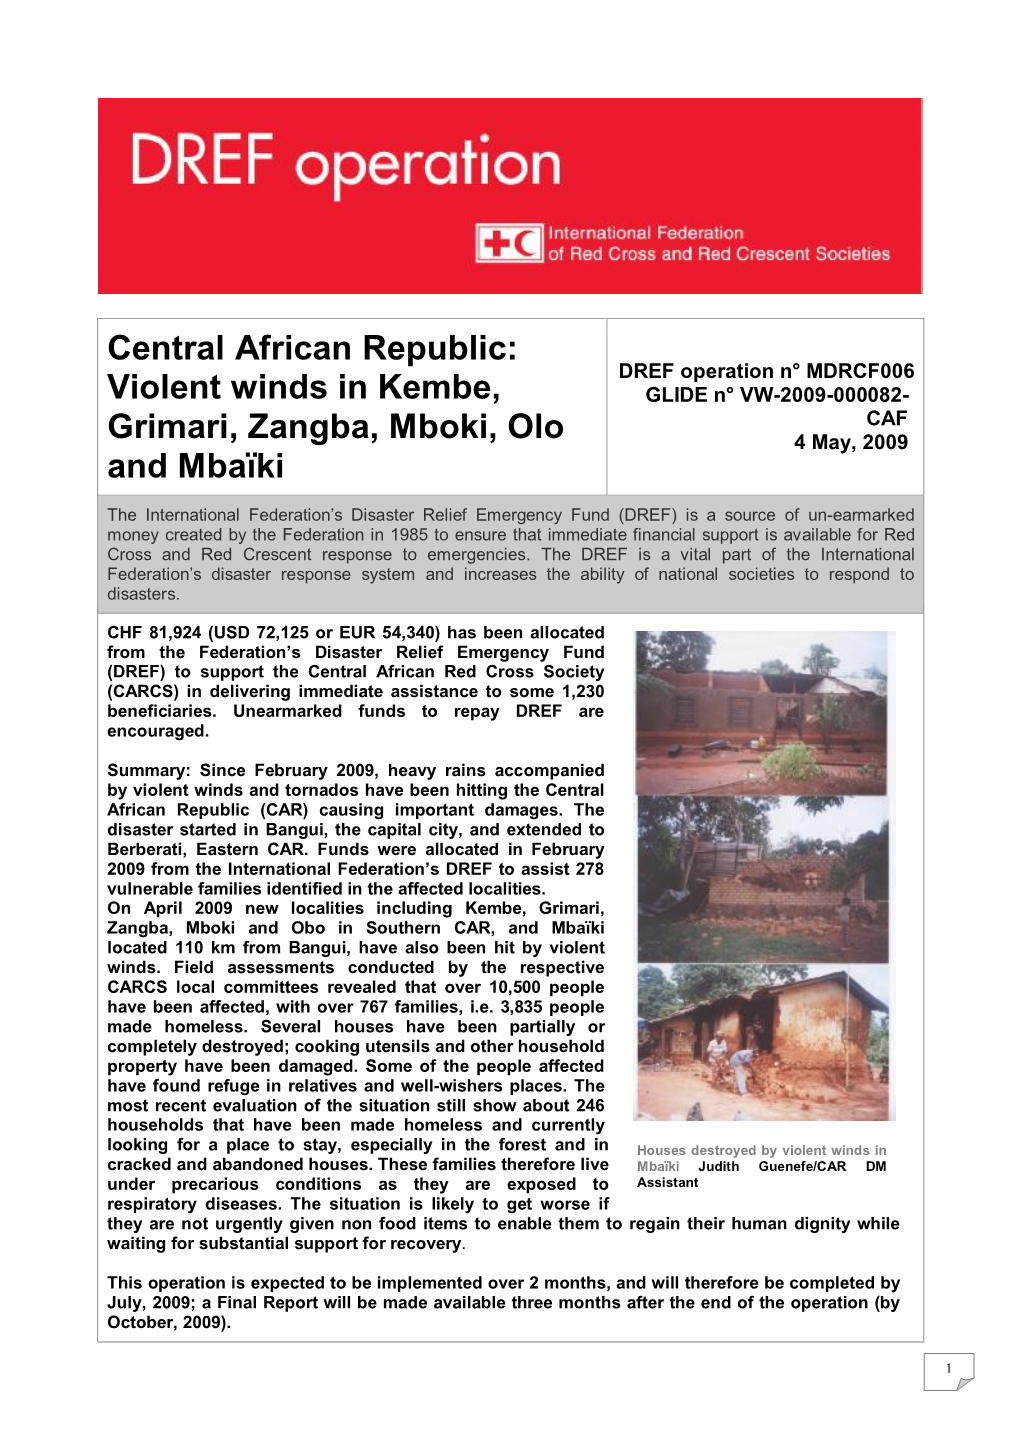 Central African Republic: DREF Operation N° MDRCF006 Violent Winds in Kembe, GLIDE N° VW-2009-000082- CAF Grimari, Zangba, Mboki, Olo 4 May, 2009 and Mbaïki